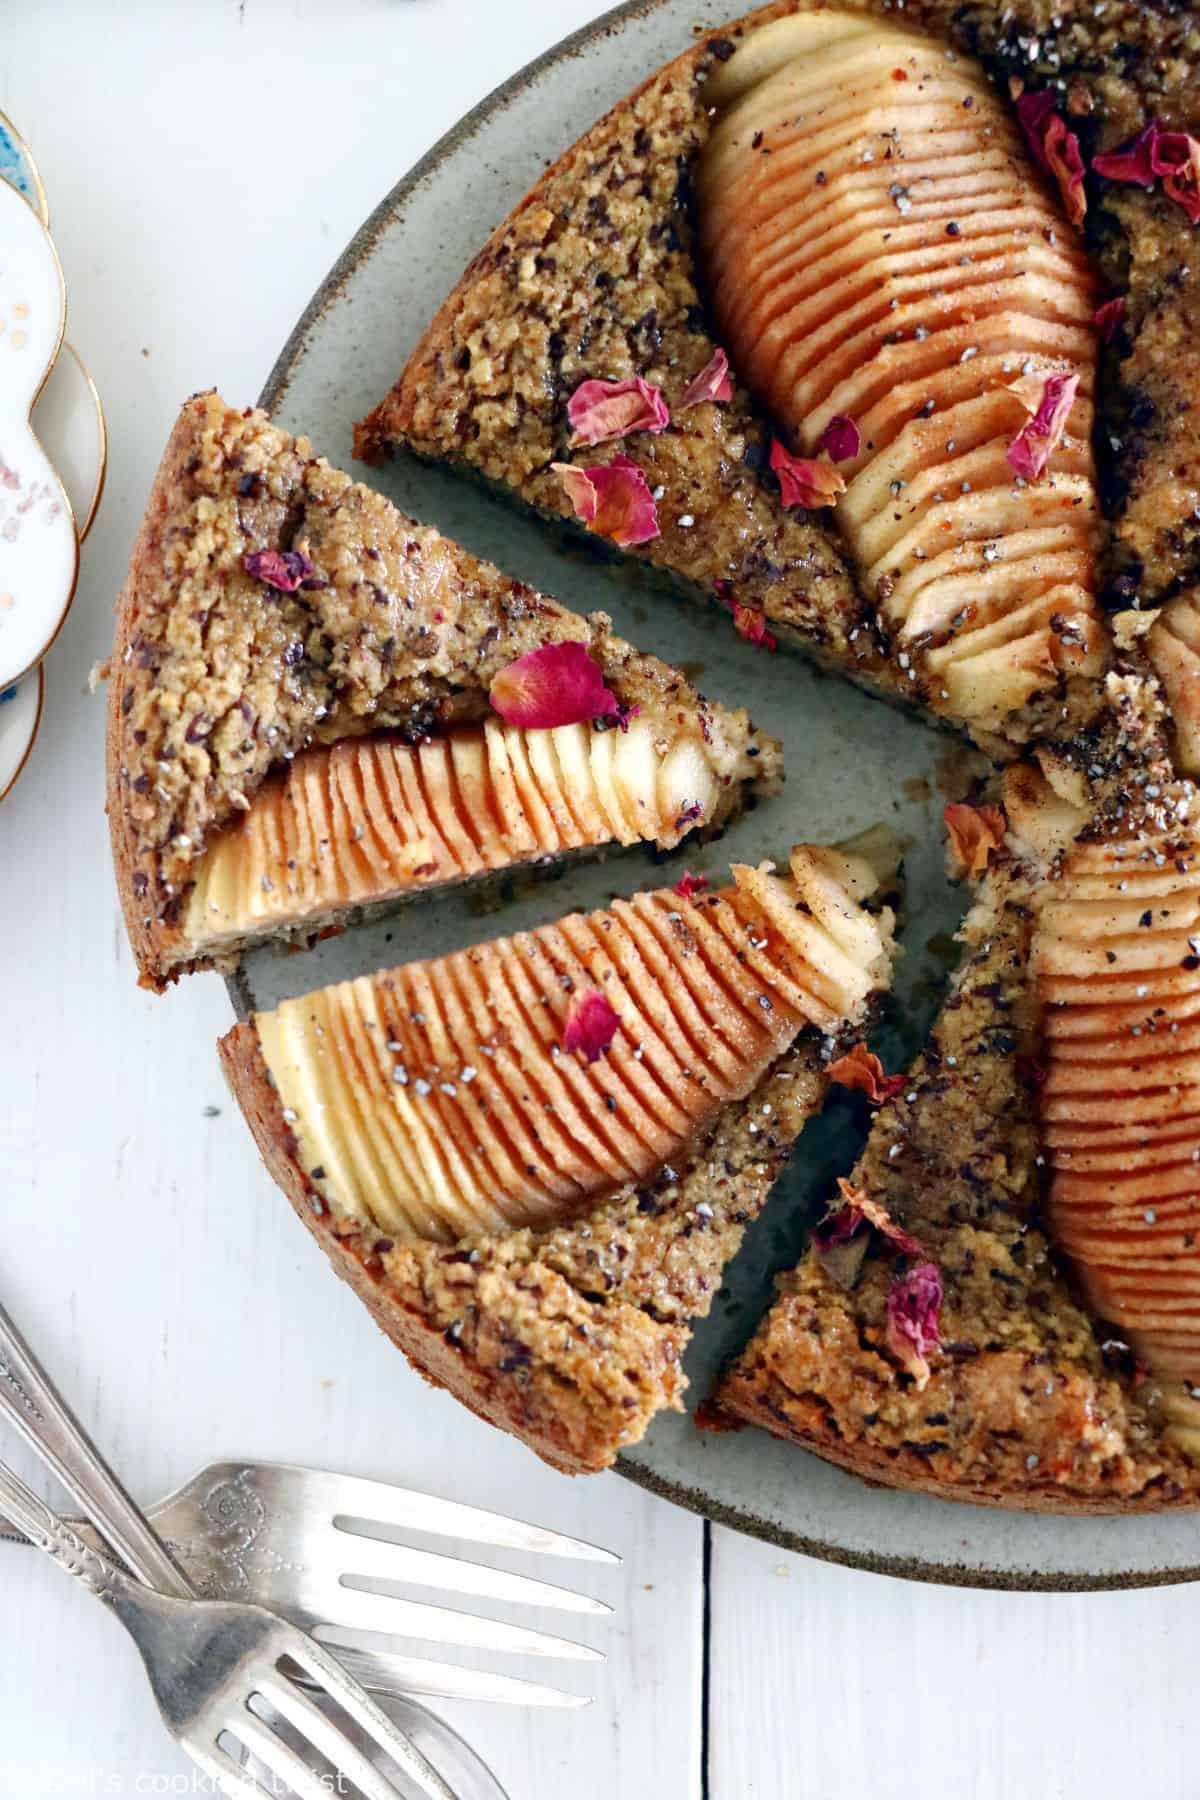 This healthy cardamom pear cake is vegan (no eggs, no dairy), gluten-free, and naturally sweetened. The perfect coffee cake, made healthy!